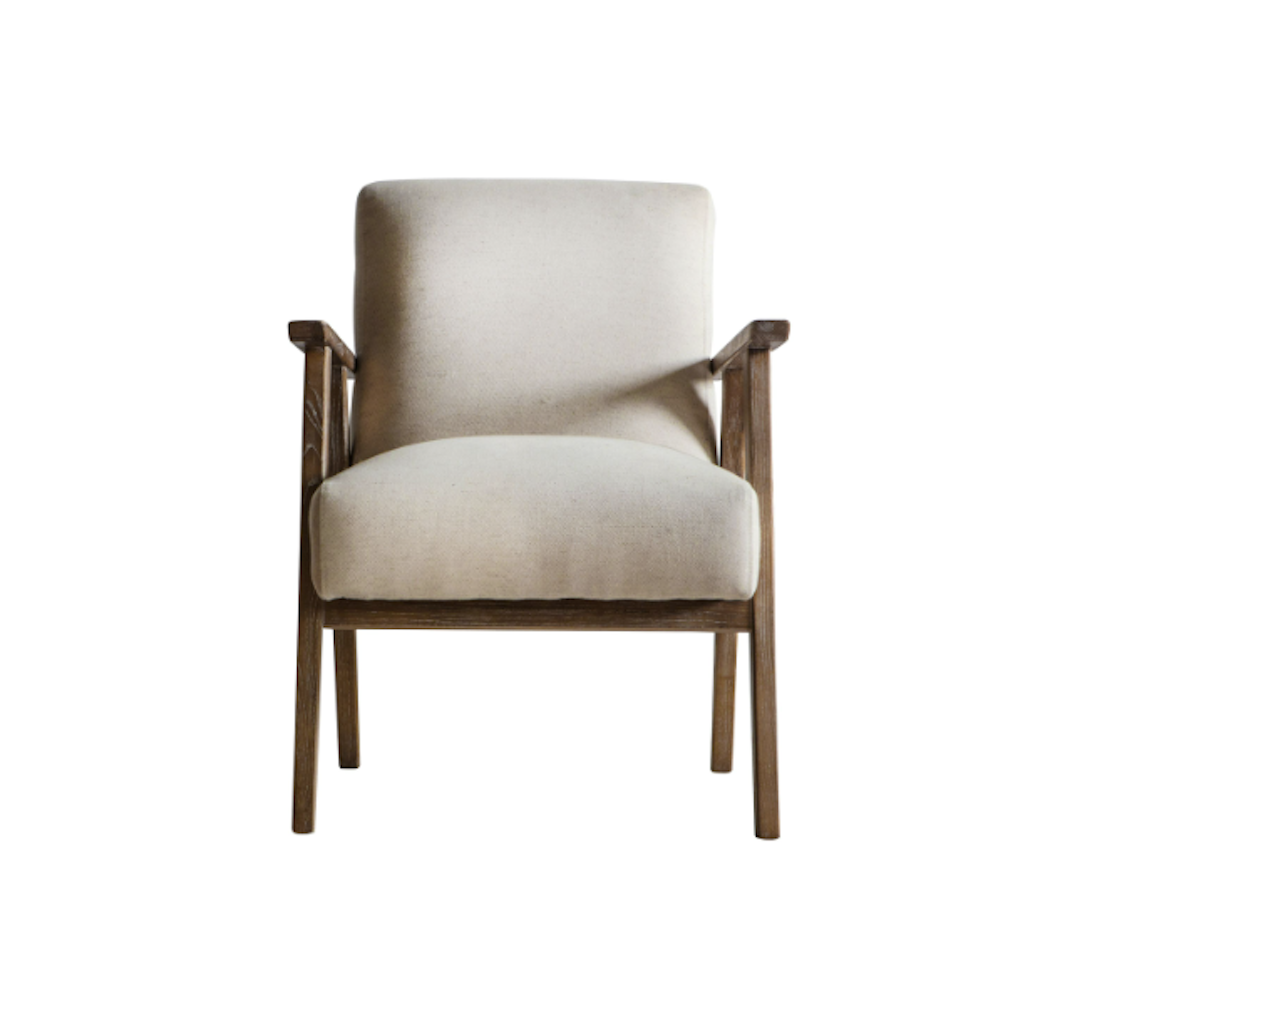 The Forest & Co. Natural Linen And Teak Armchair